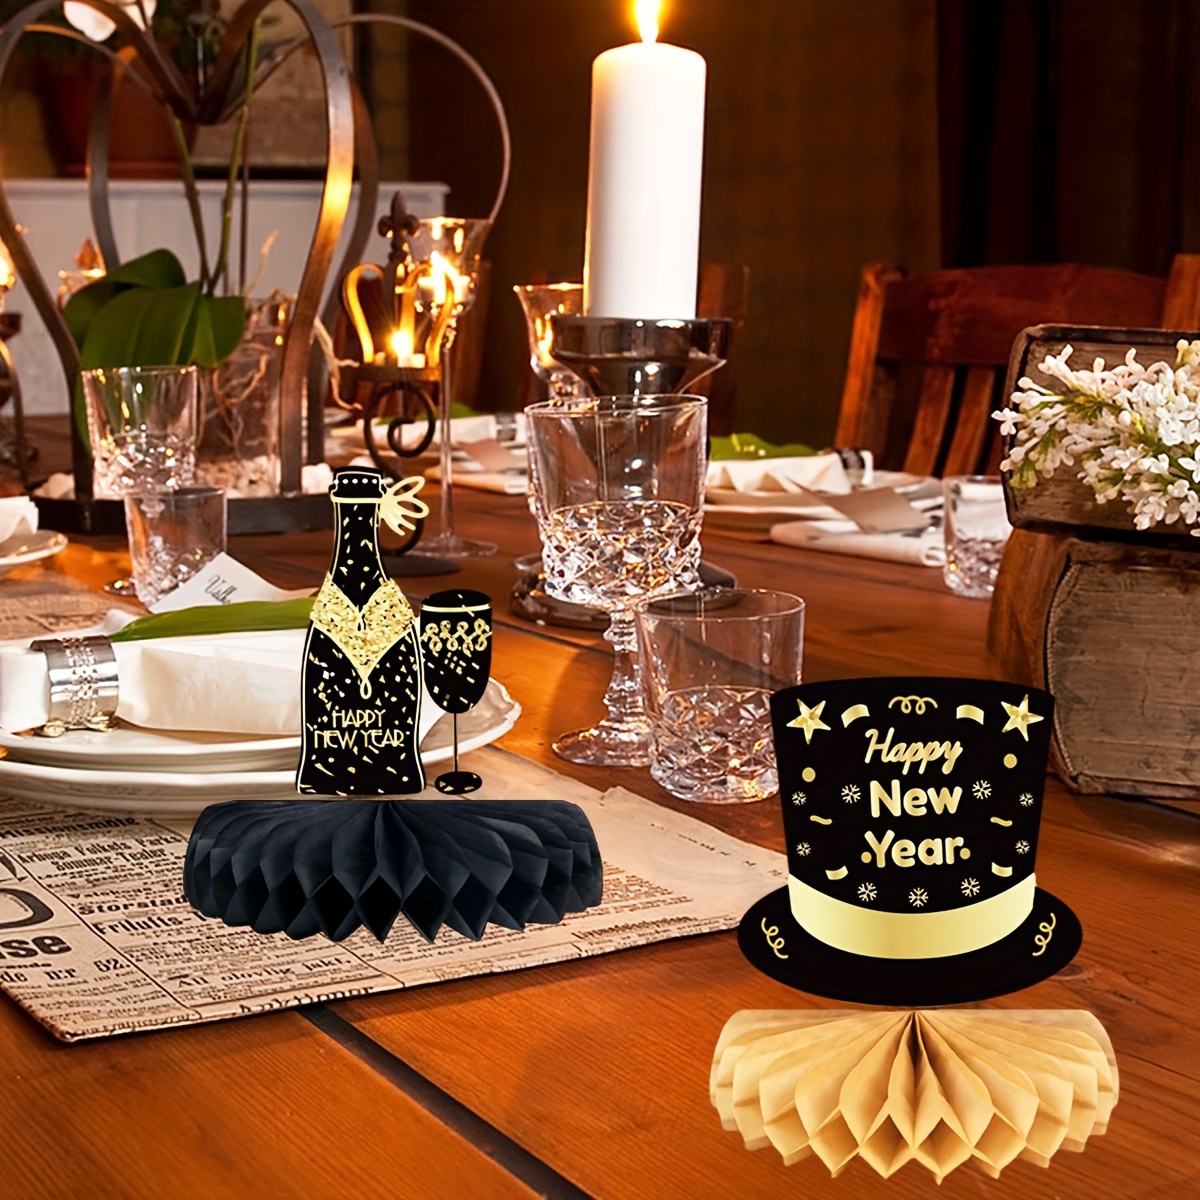 9PCS New Year Centerpieces for Table Decorations - Black & Gold Honeycomb